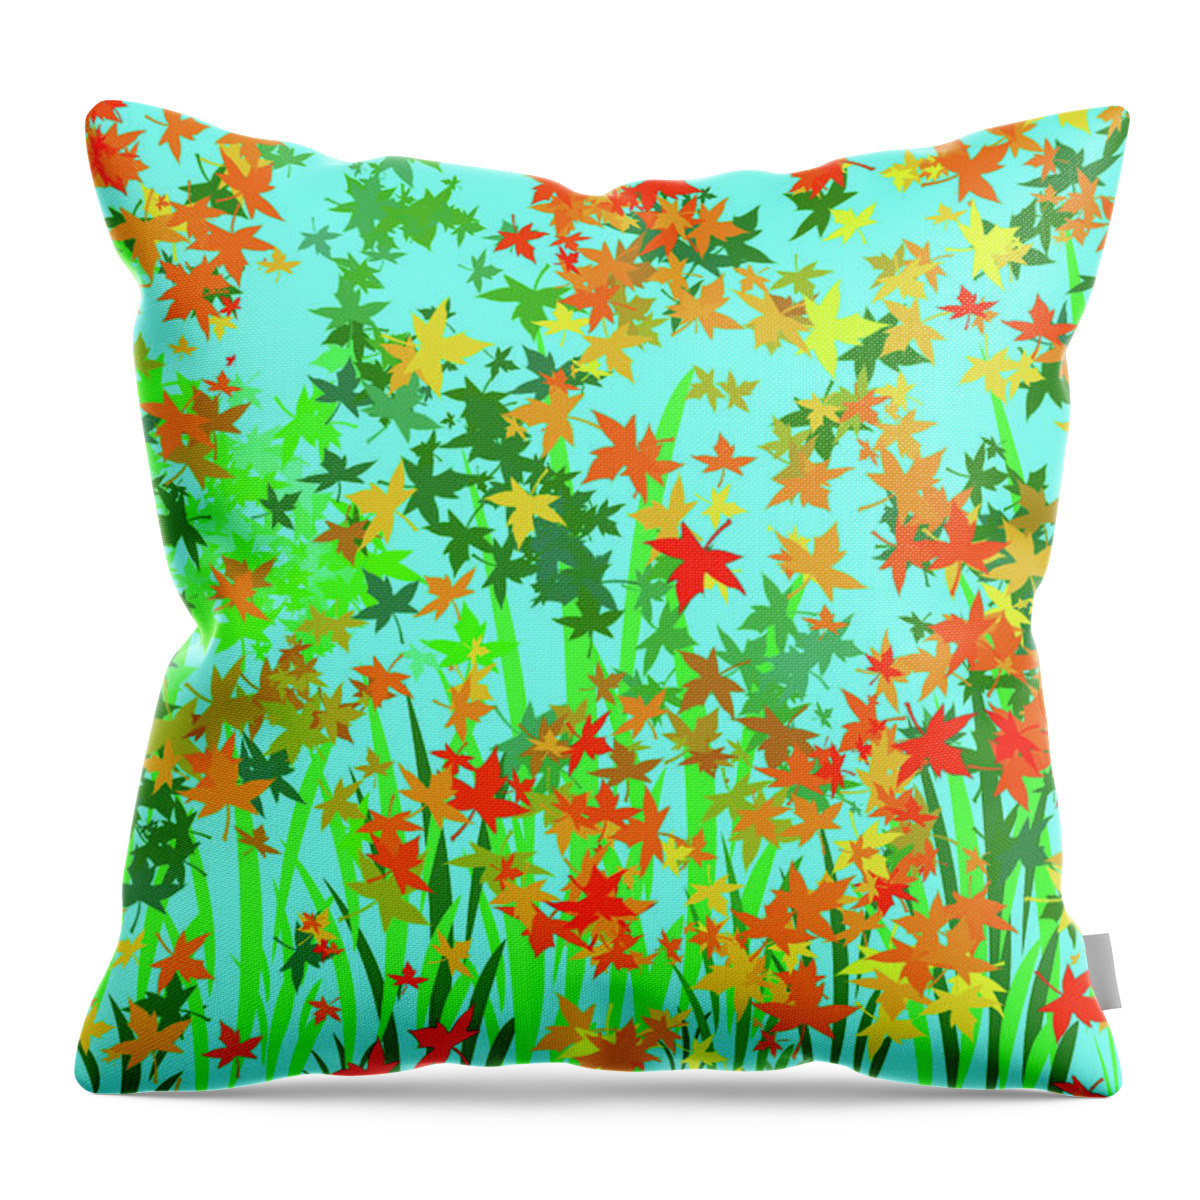 Outdoors Throw Pillow featuring the digital art Autumn Leaves. Creative Abstract Design by Raj Kamal